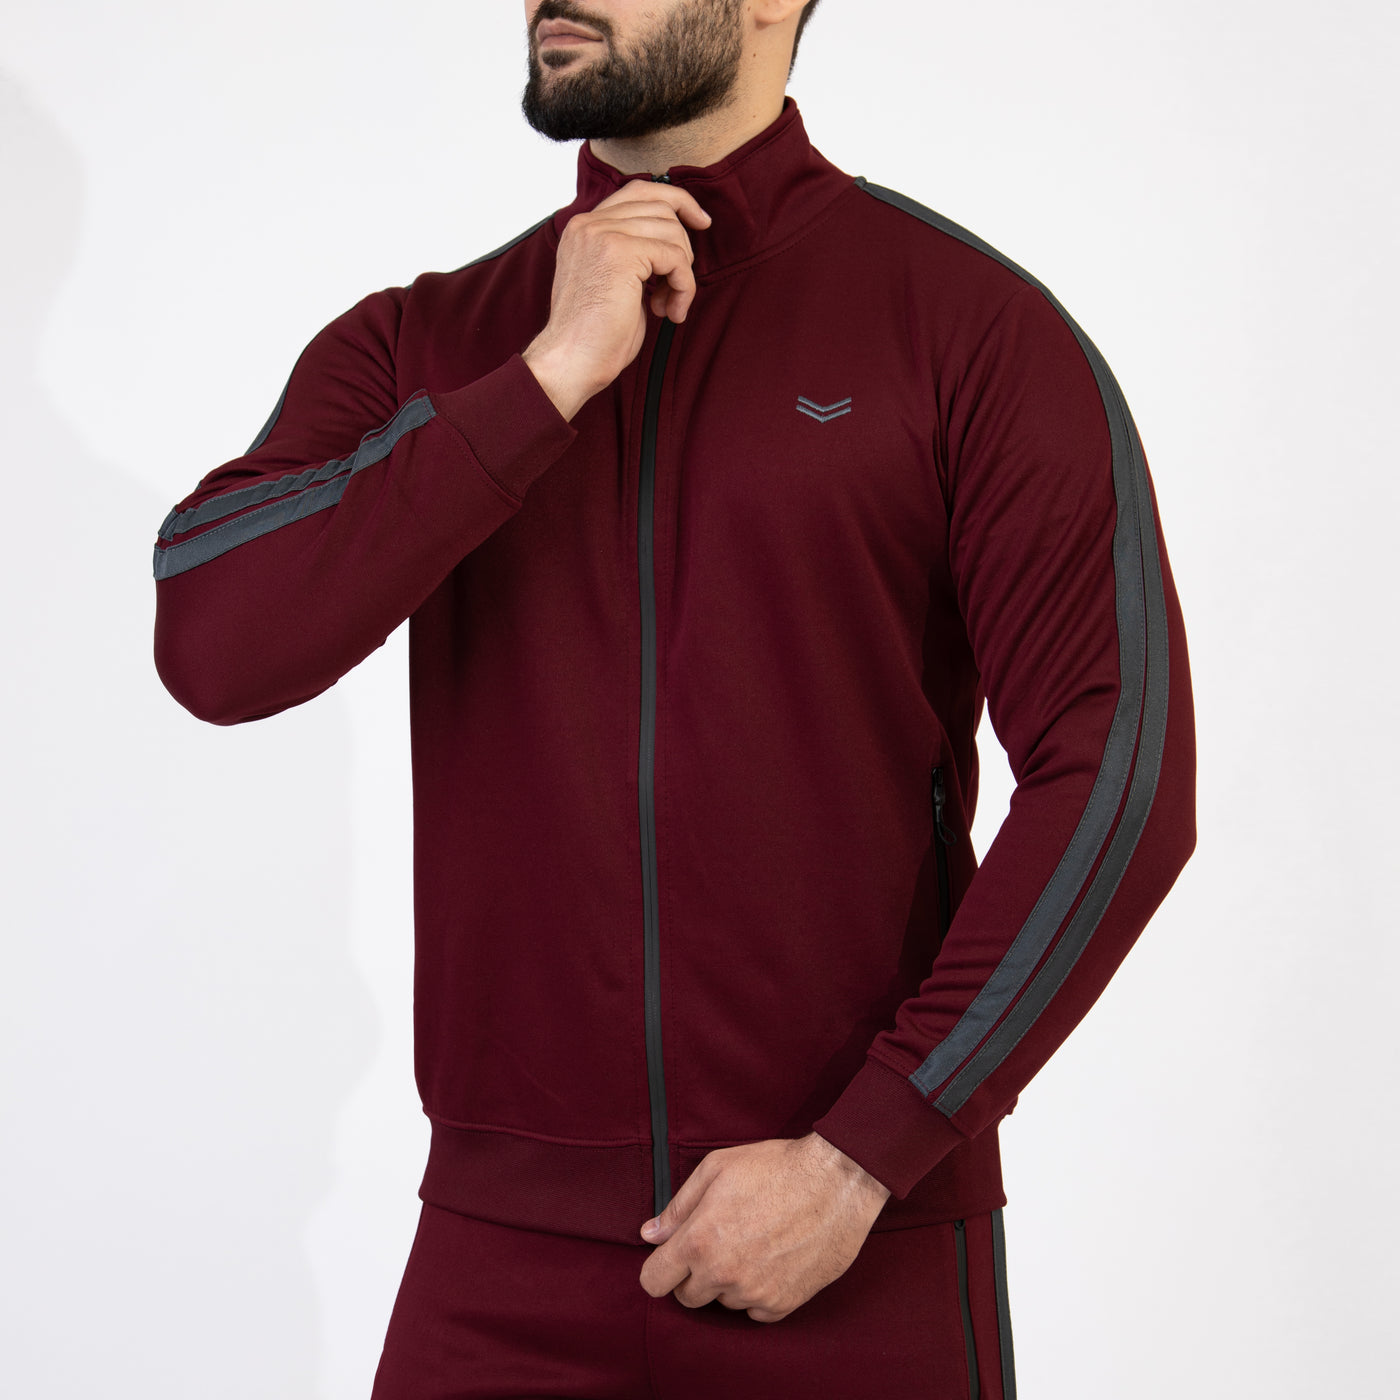 Maroon Quick Dry Mock Neck Zipper Jacket with Two Gray Stripes